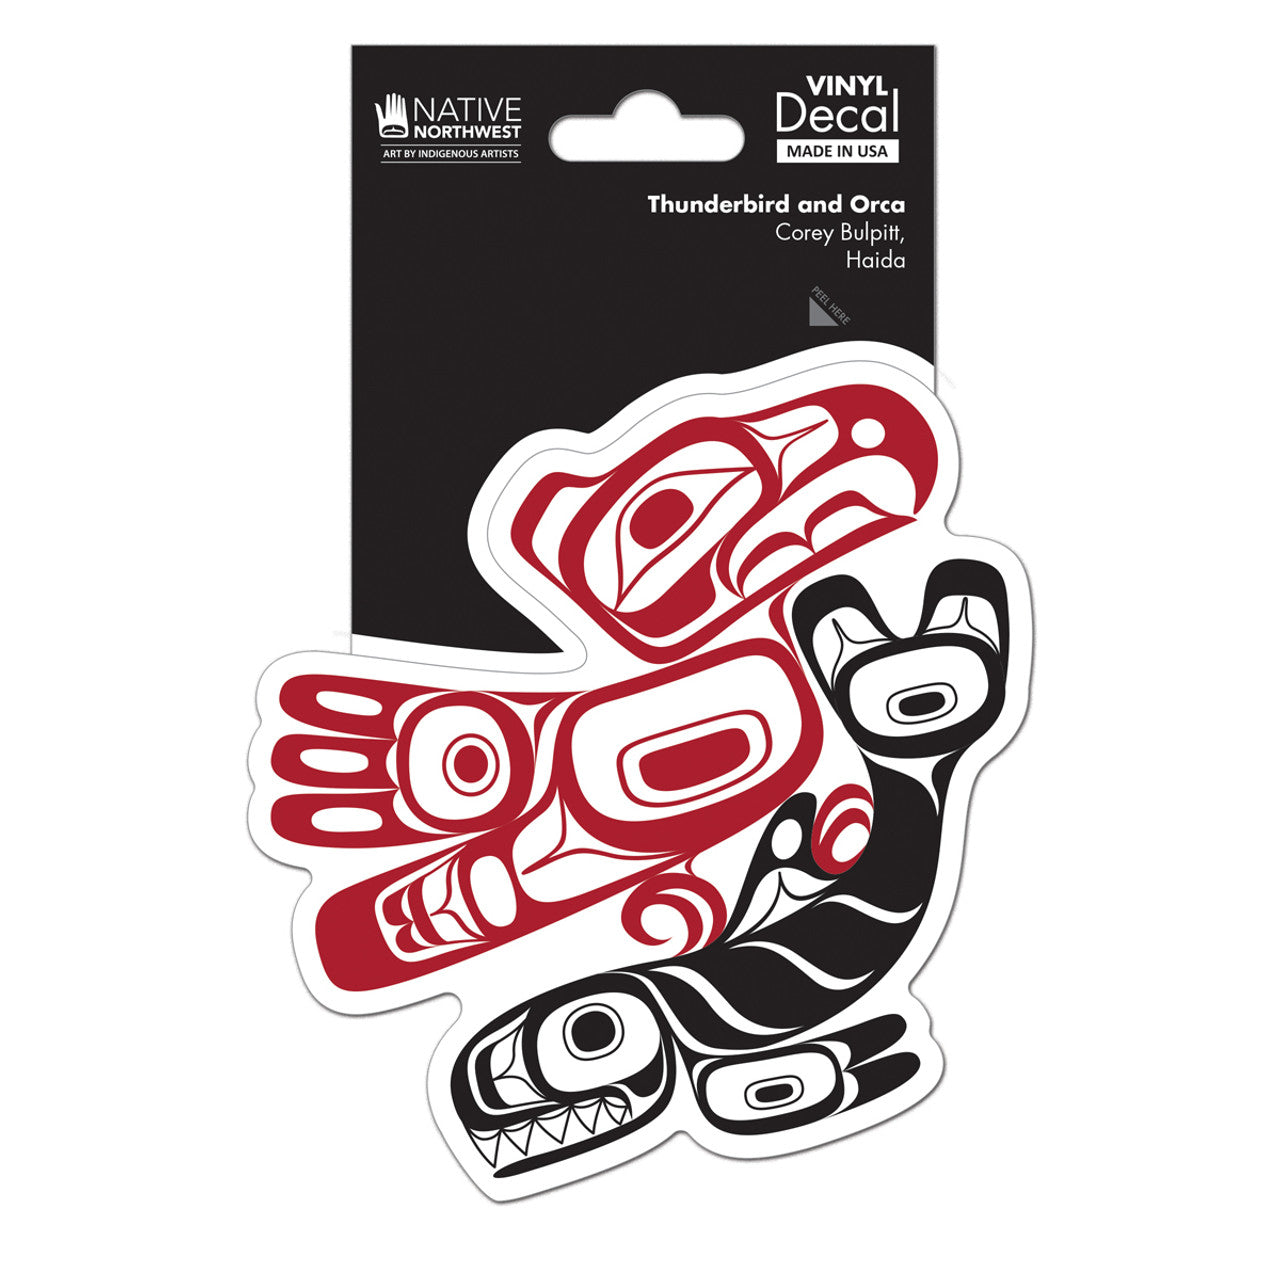 DECALS - Corey Bulpitt Thunderbird and Orca - D241 - House of Himwitsa Native Art Gallery and Gifts